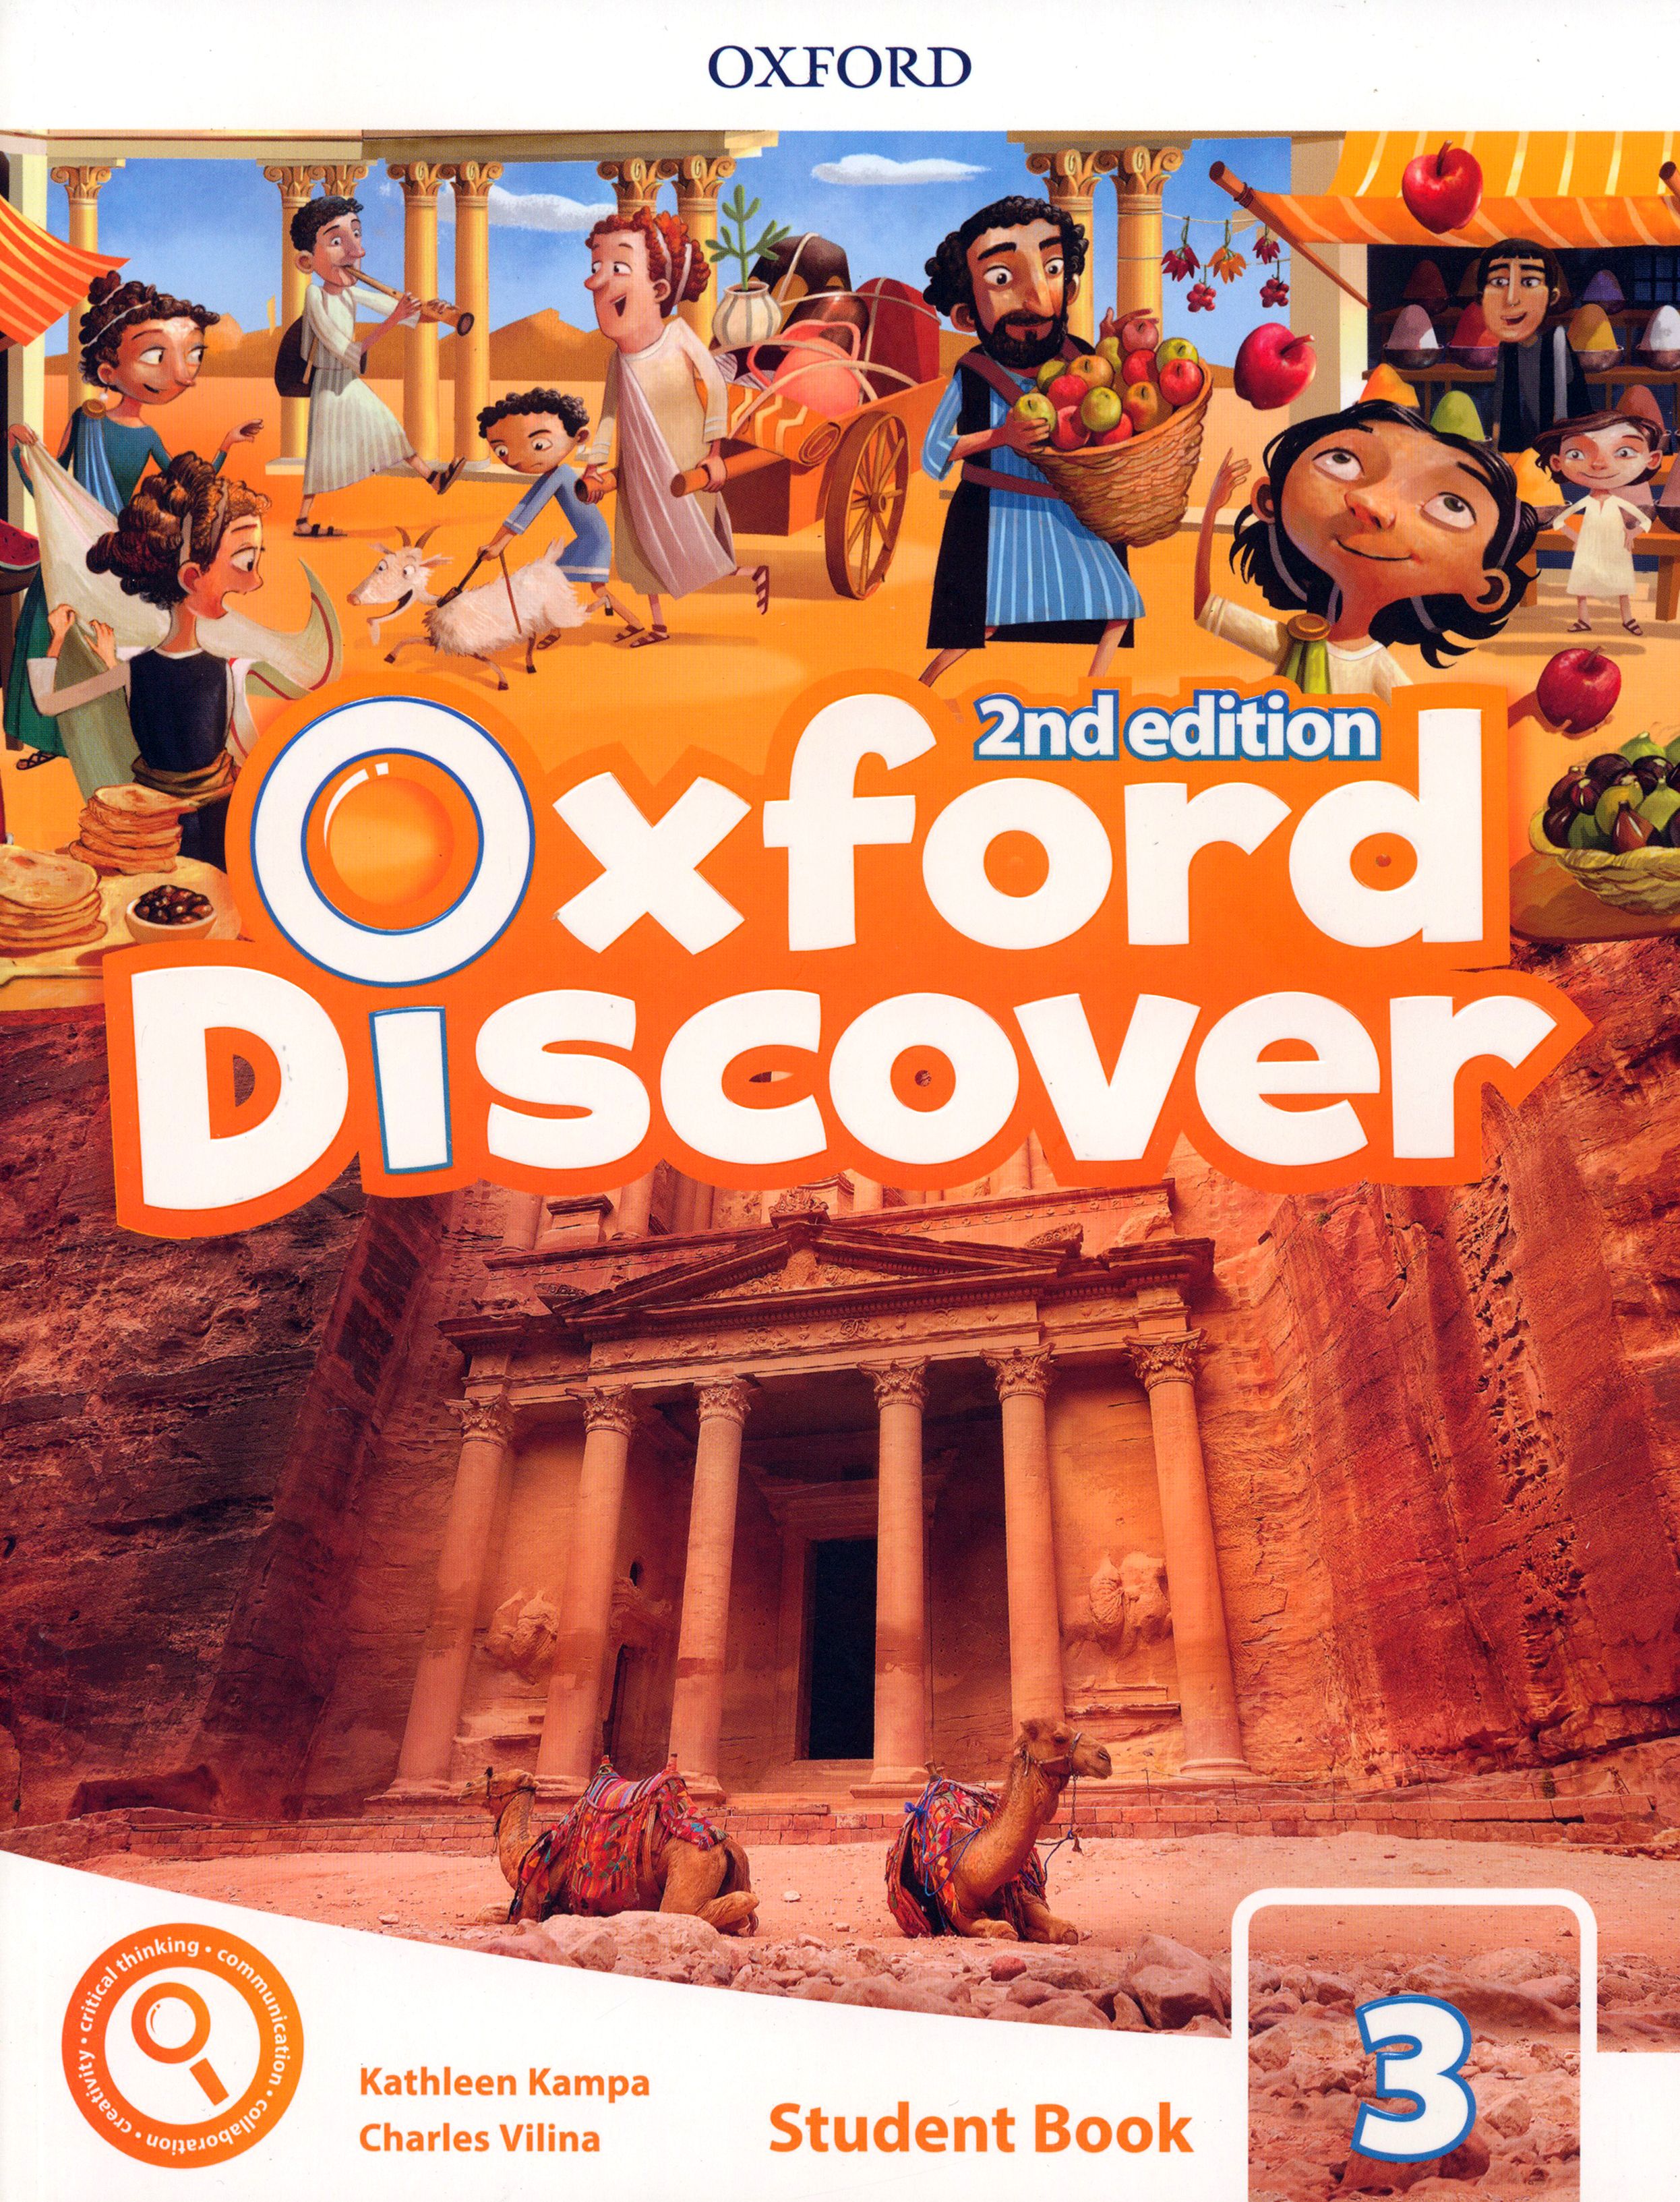 Учебник discover. Oxford discover (2nd Edition) 3 student's book. Oxford discover 1 student's book 2nd Edition. Oxford discover 1 student book 2nd Edition Audio. Oxford discover 1 (student’s book, Workbook).